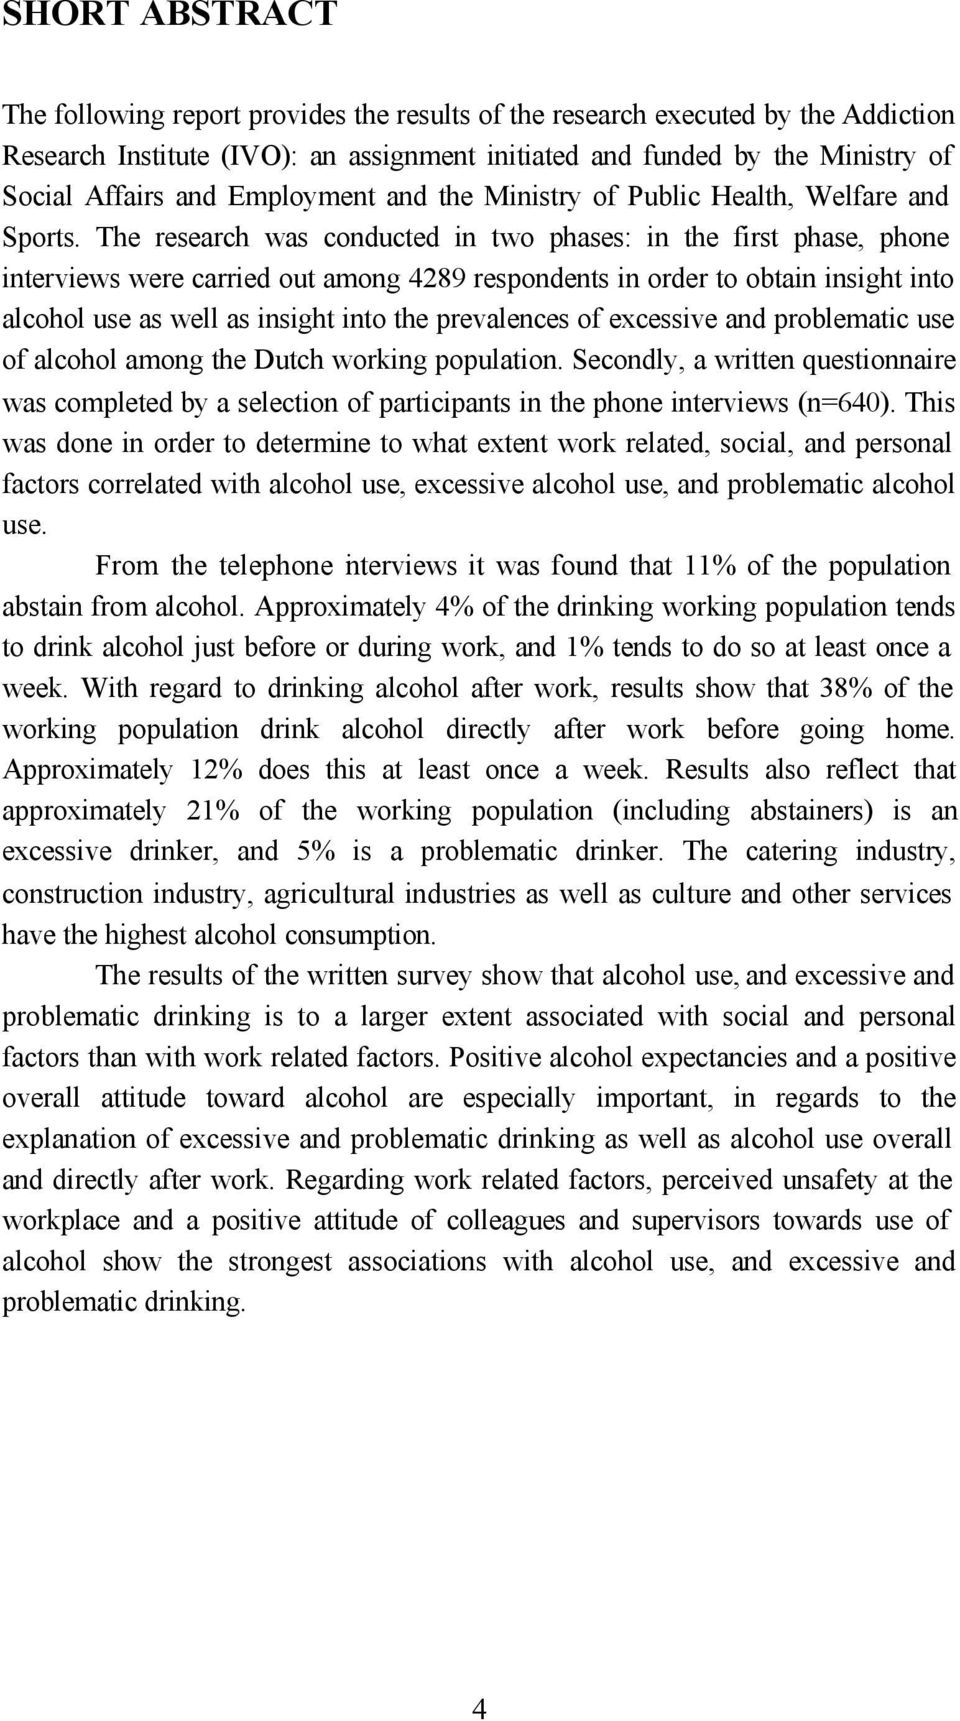 The research was conducted in two phases: in the first phase, phone interviews were carried out among 4289 respondents in order to obtain insight into alcohol use as well as insight into the